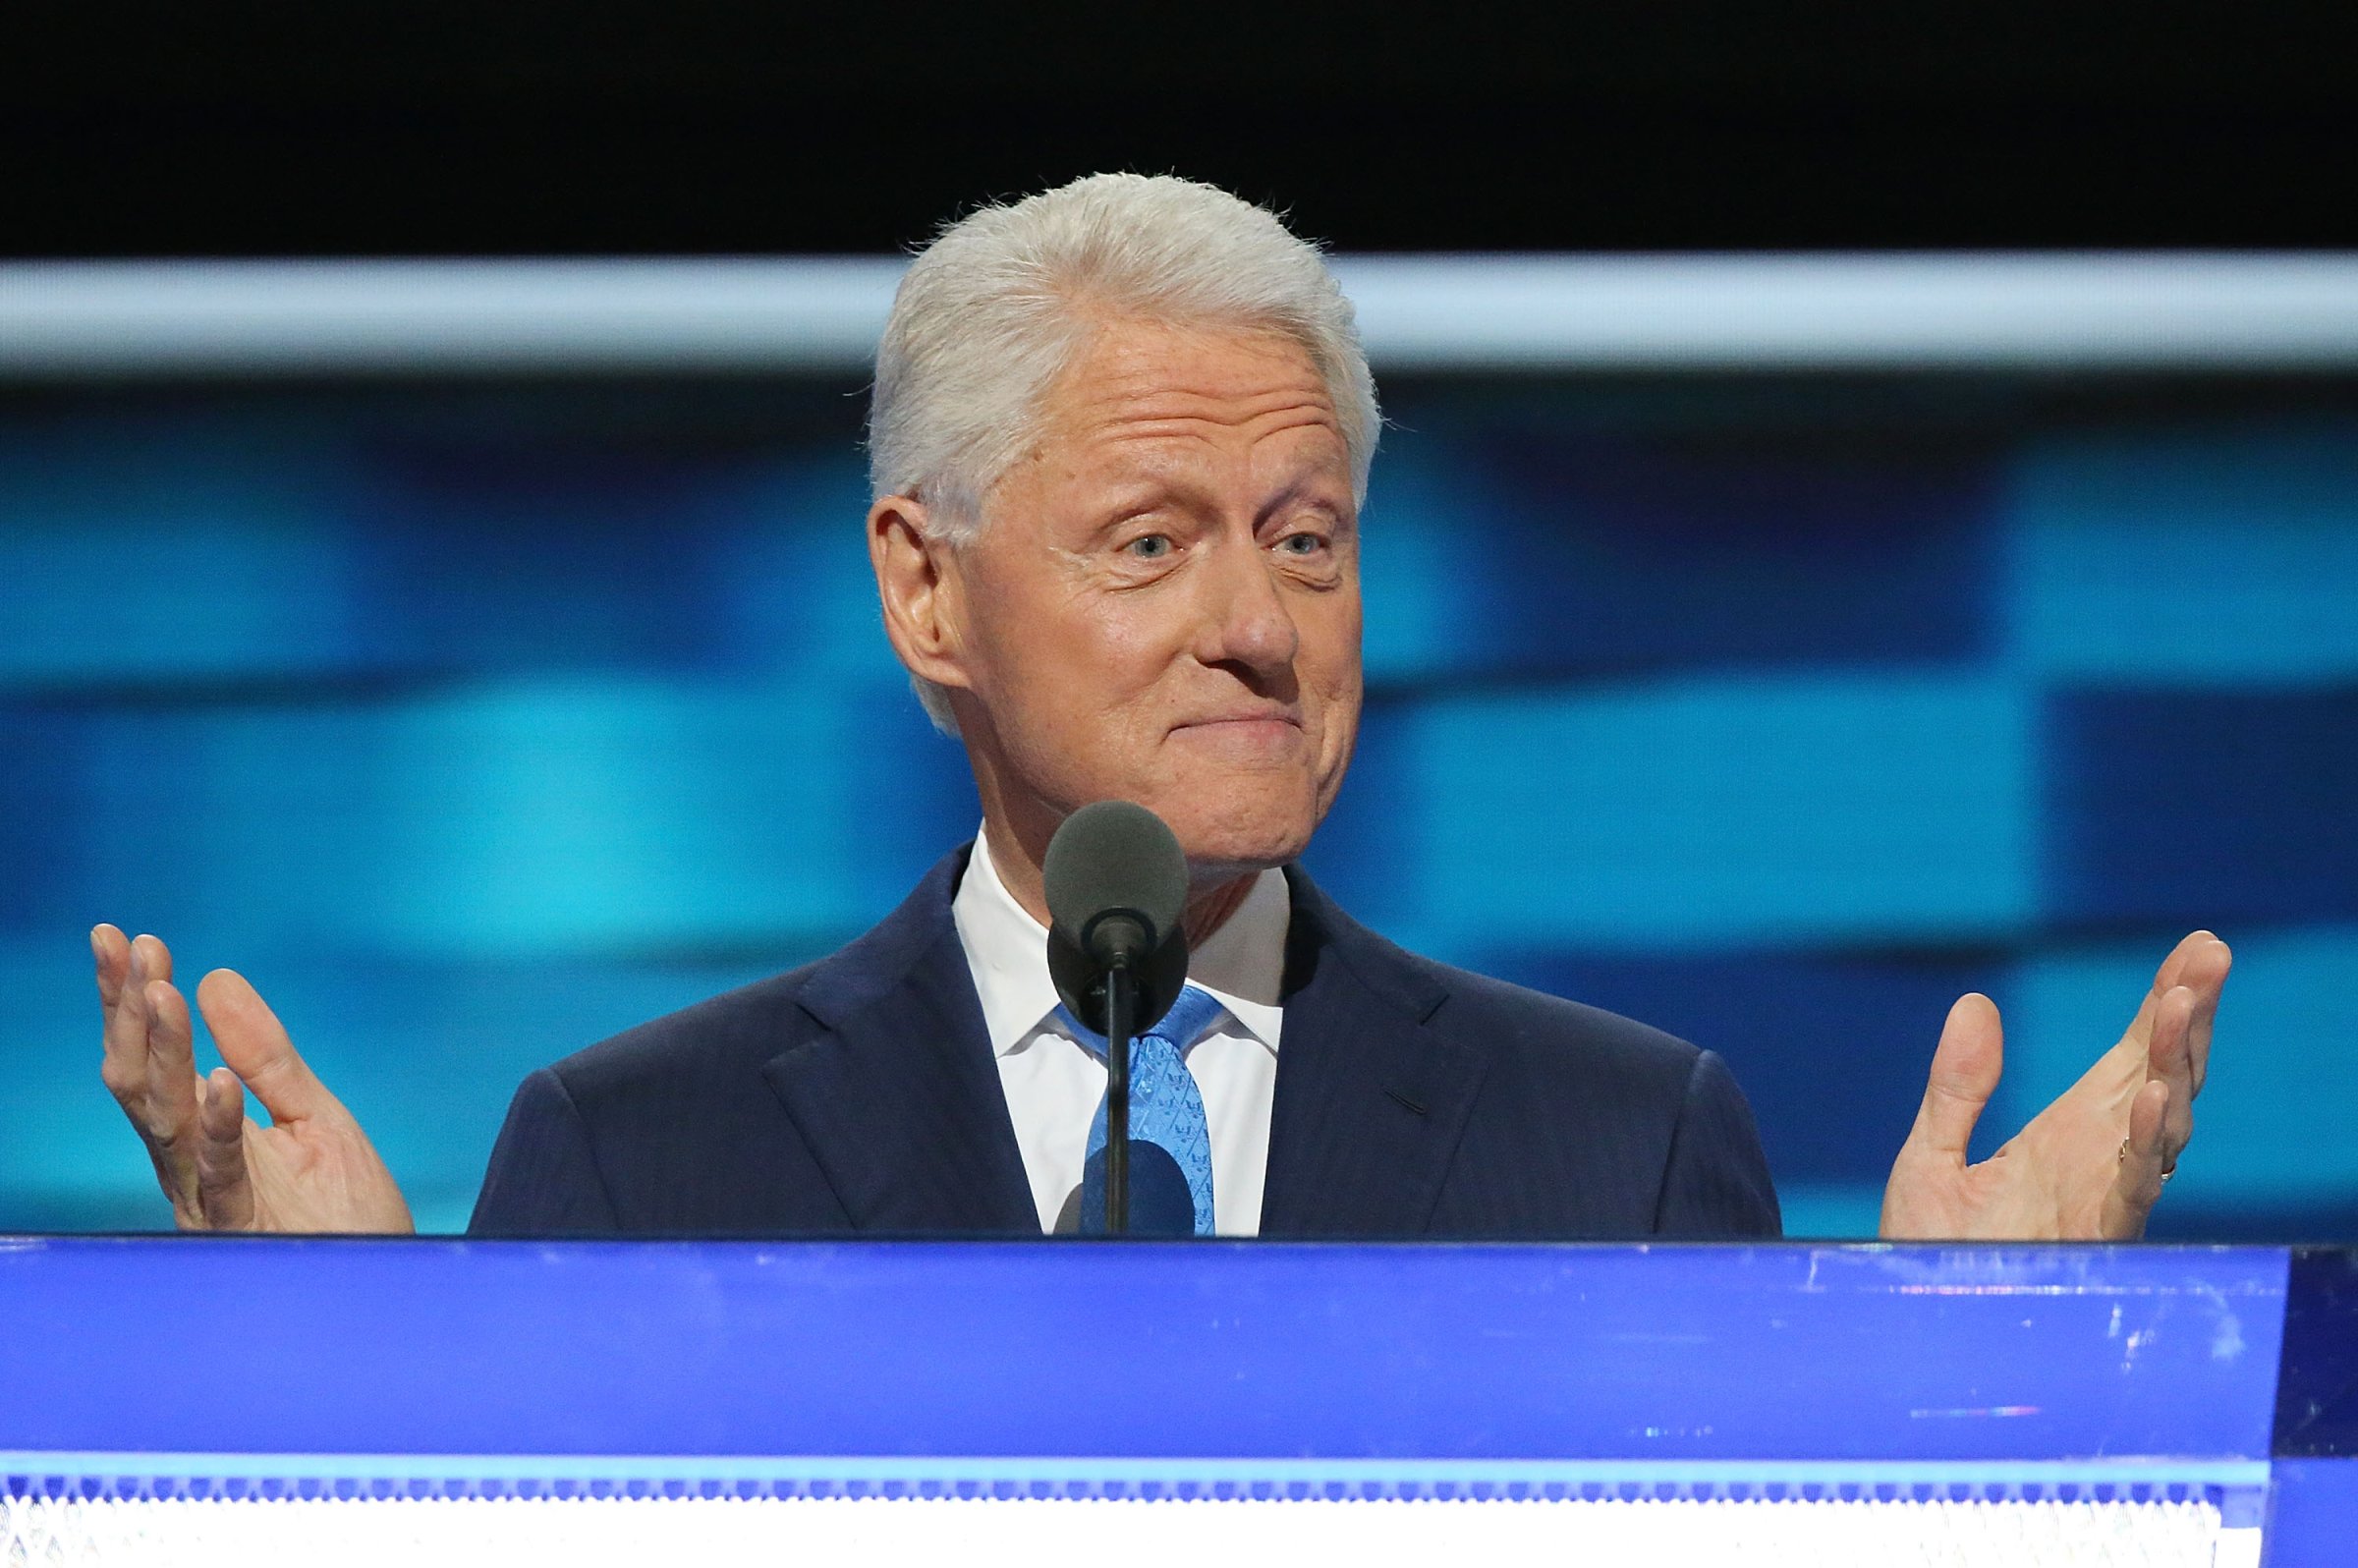 Former U.S. President Bill Clinton delivers remarks on the second day of the 2016 Democratic National Convention at Wells Fargo Center on July 26, 2016 in Philadelphia, Pennsylvania.